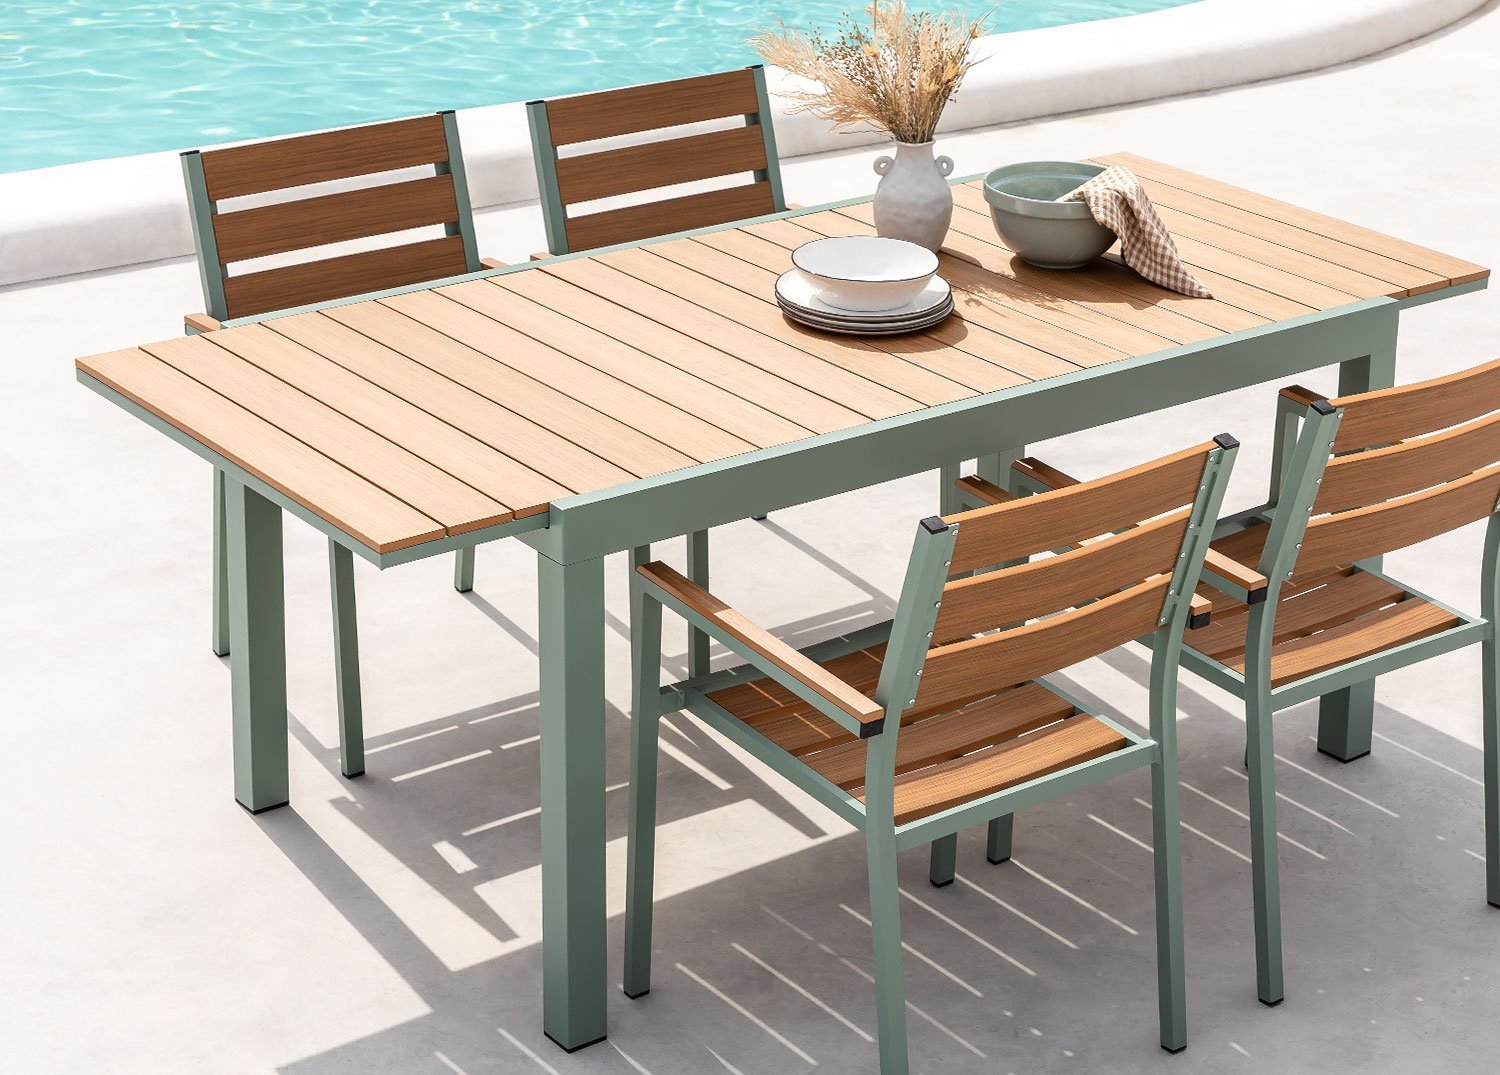 Set of Extendable Rectangular Aluminum Table (150-197x90 cm) and 4 Stackable Garden Chairs with Saura Armrests, gallery image 2